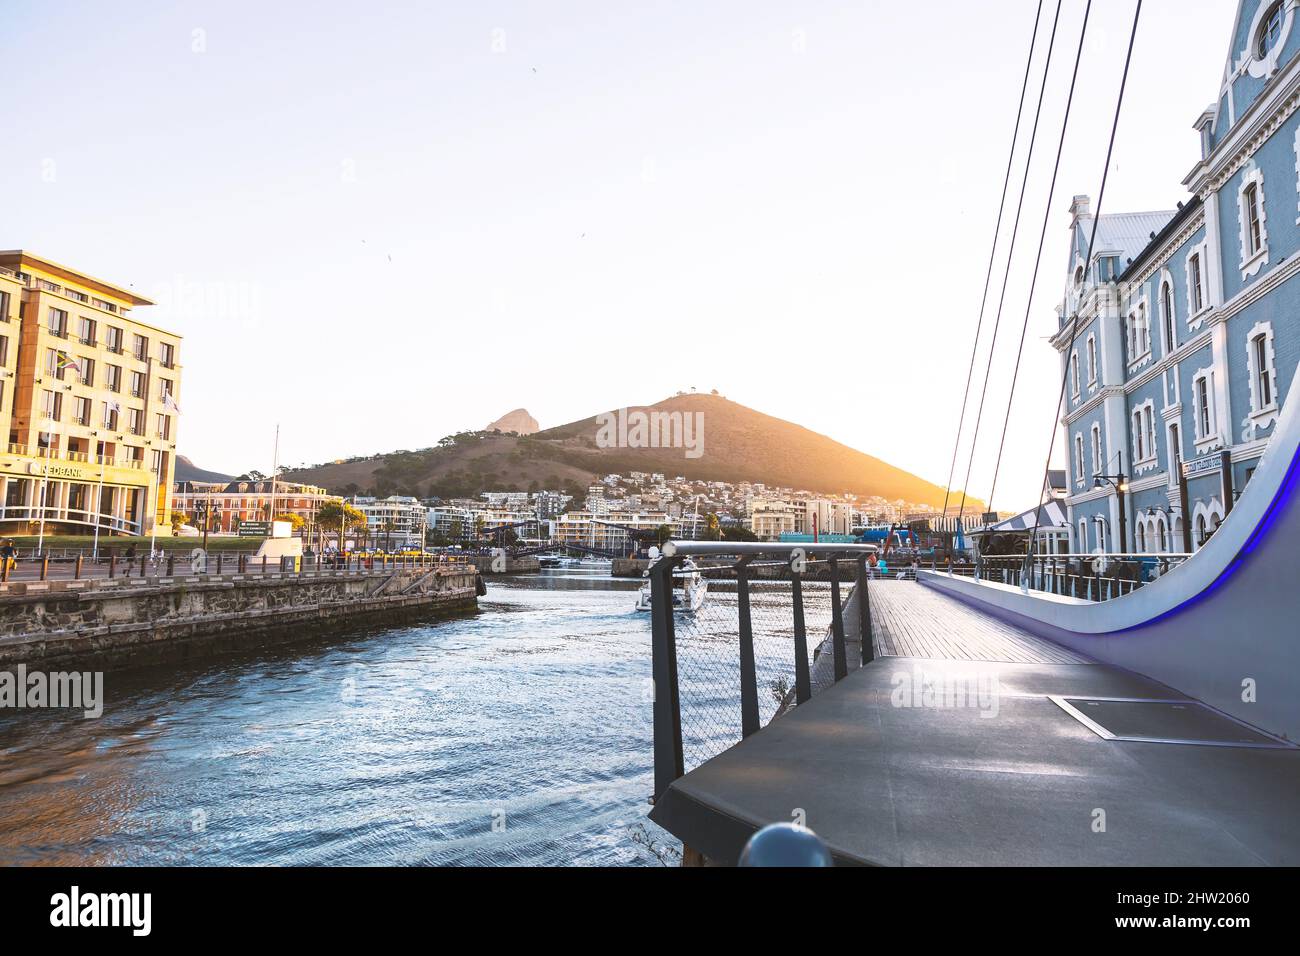 Cape Town, South Africa, 26th February - 2022: View across harbour mouth and bridge that opens to allow boats access to harbour. Stock Photo